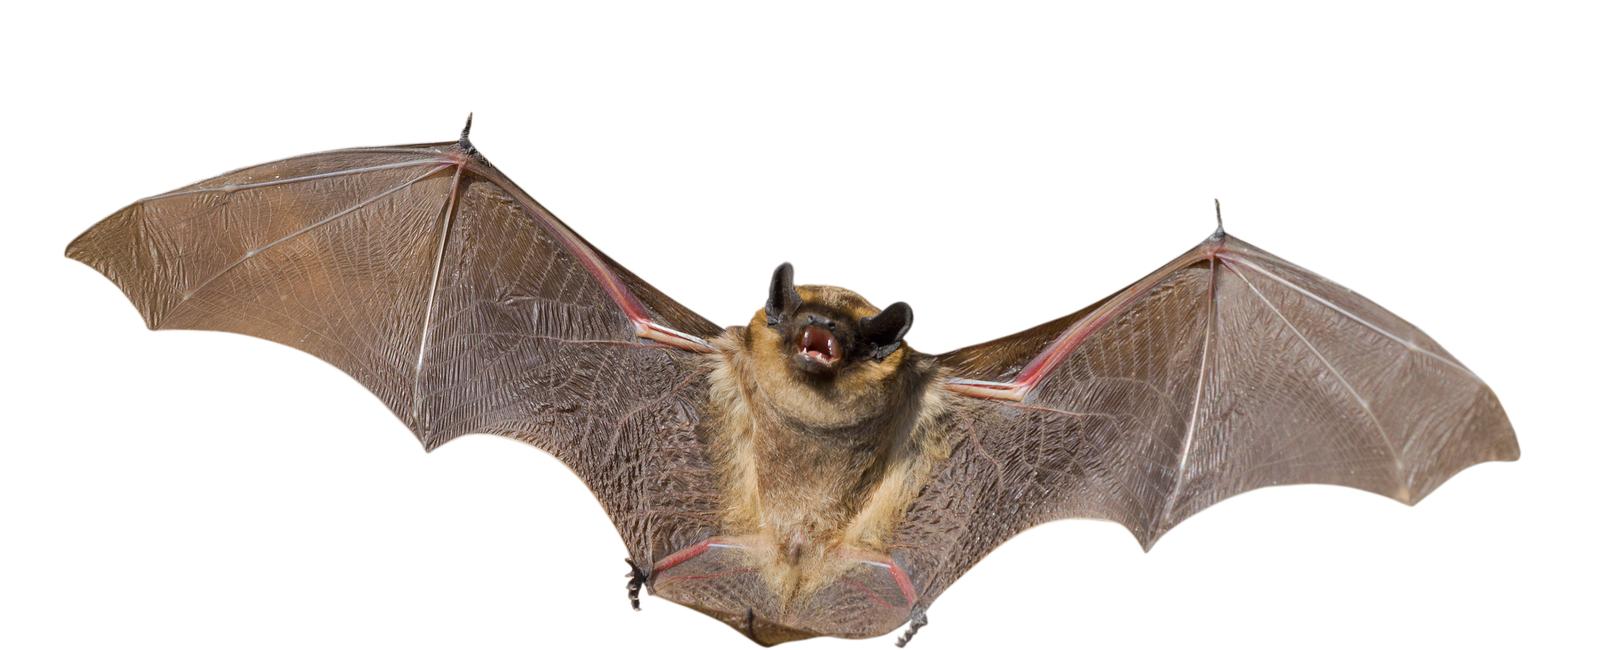 Only one type of mammal has wings and those are bats